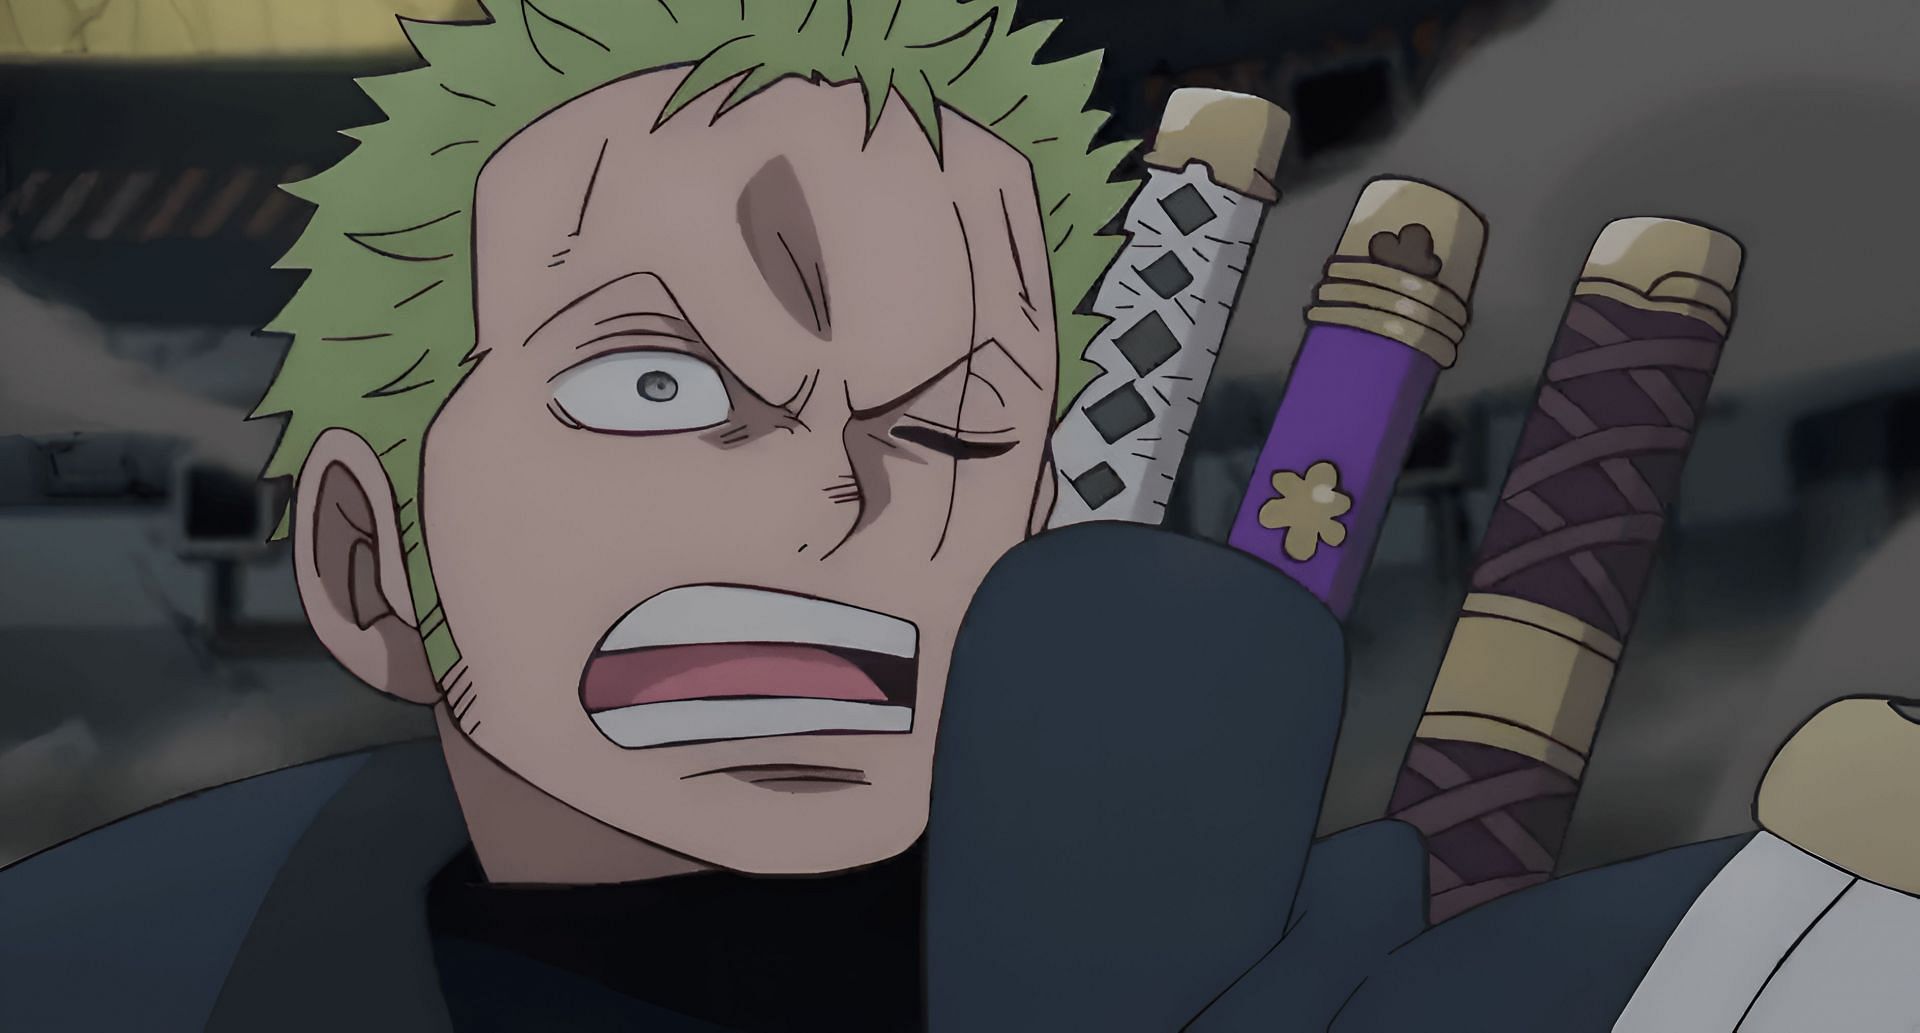 &quot;Unreal&quot;: One Piece fans hail Toei for surpassing expectations with Zoro vs S-Hawk scene in episode 1109 (Image via Toei Animation)